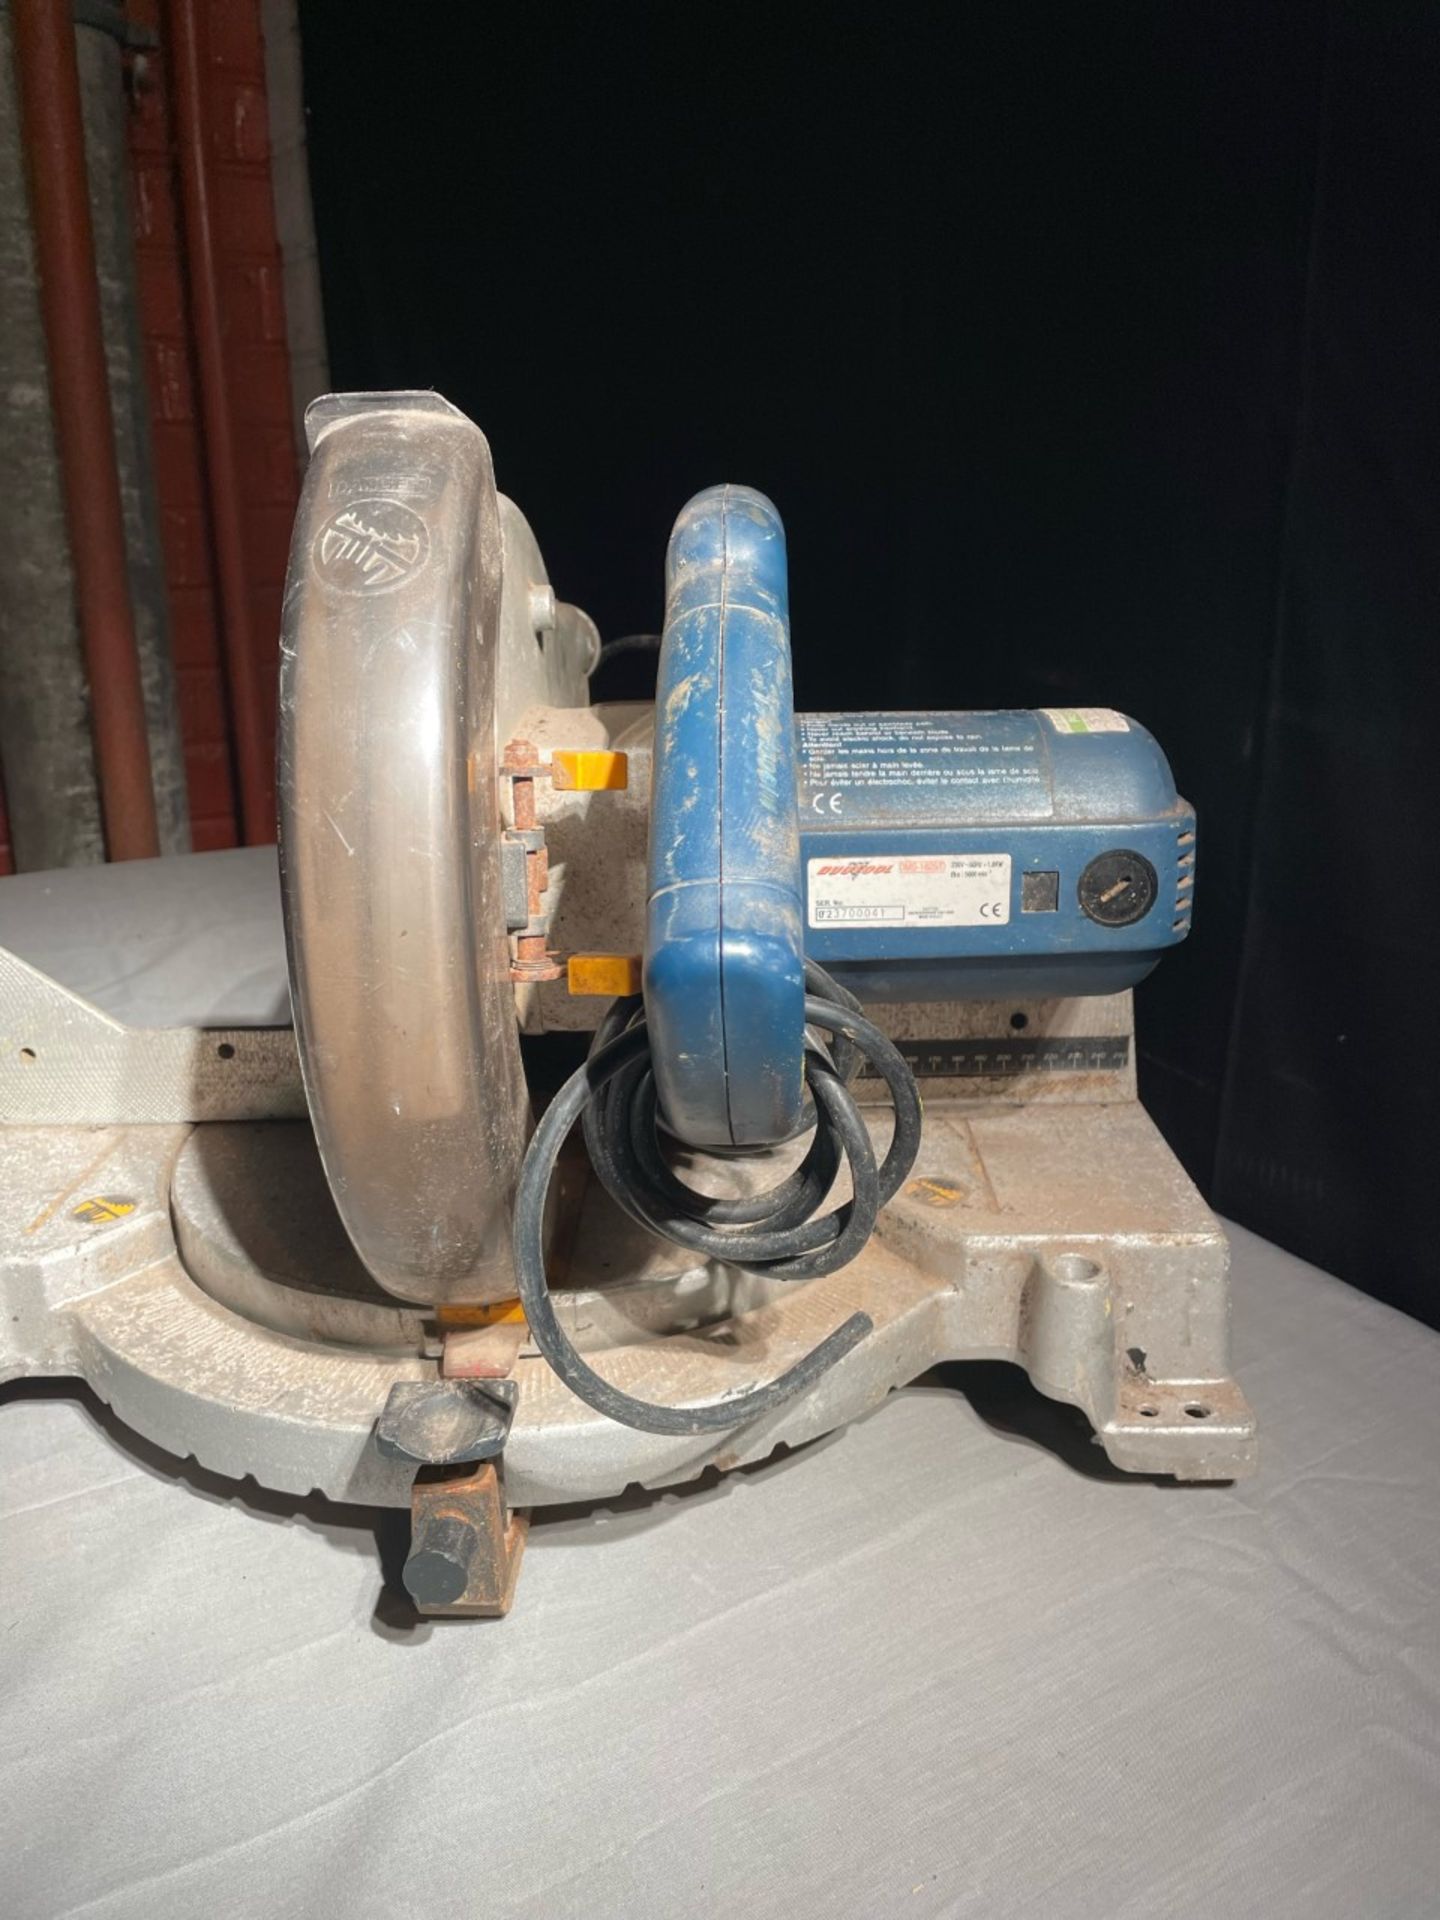 Duotool DMS 1825/D 230v mitresaw. Works but has no blade or plug attached